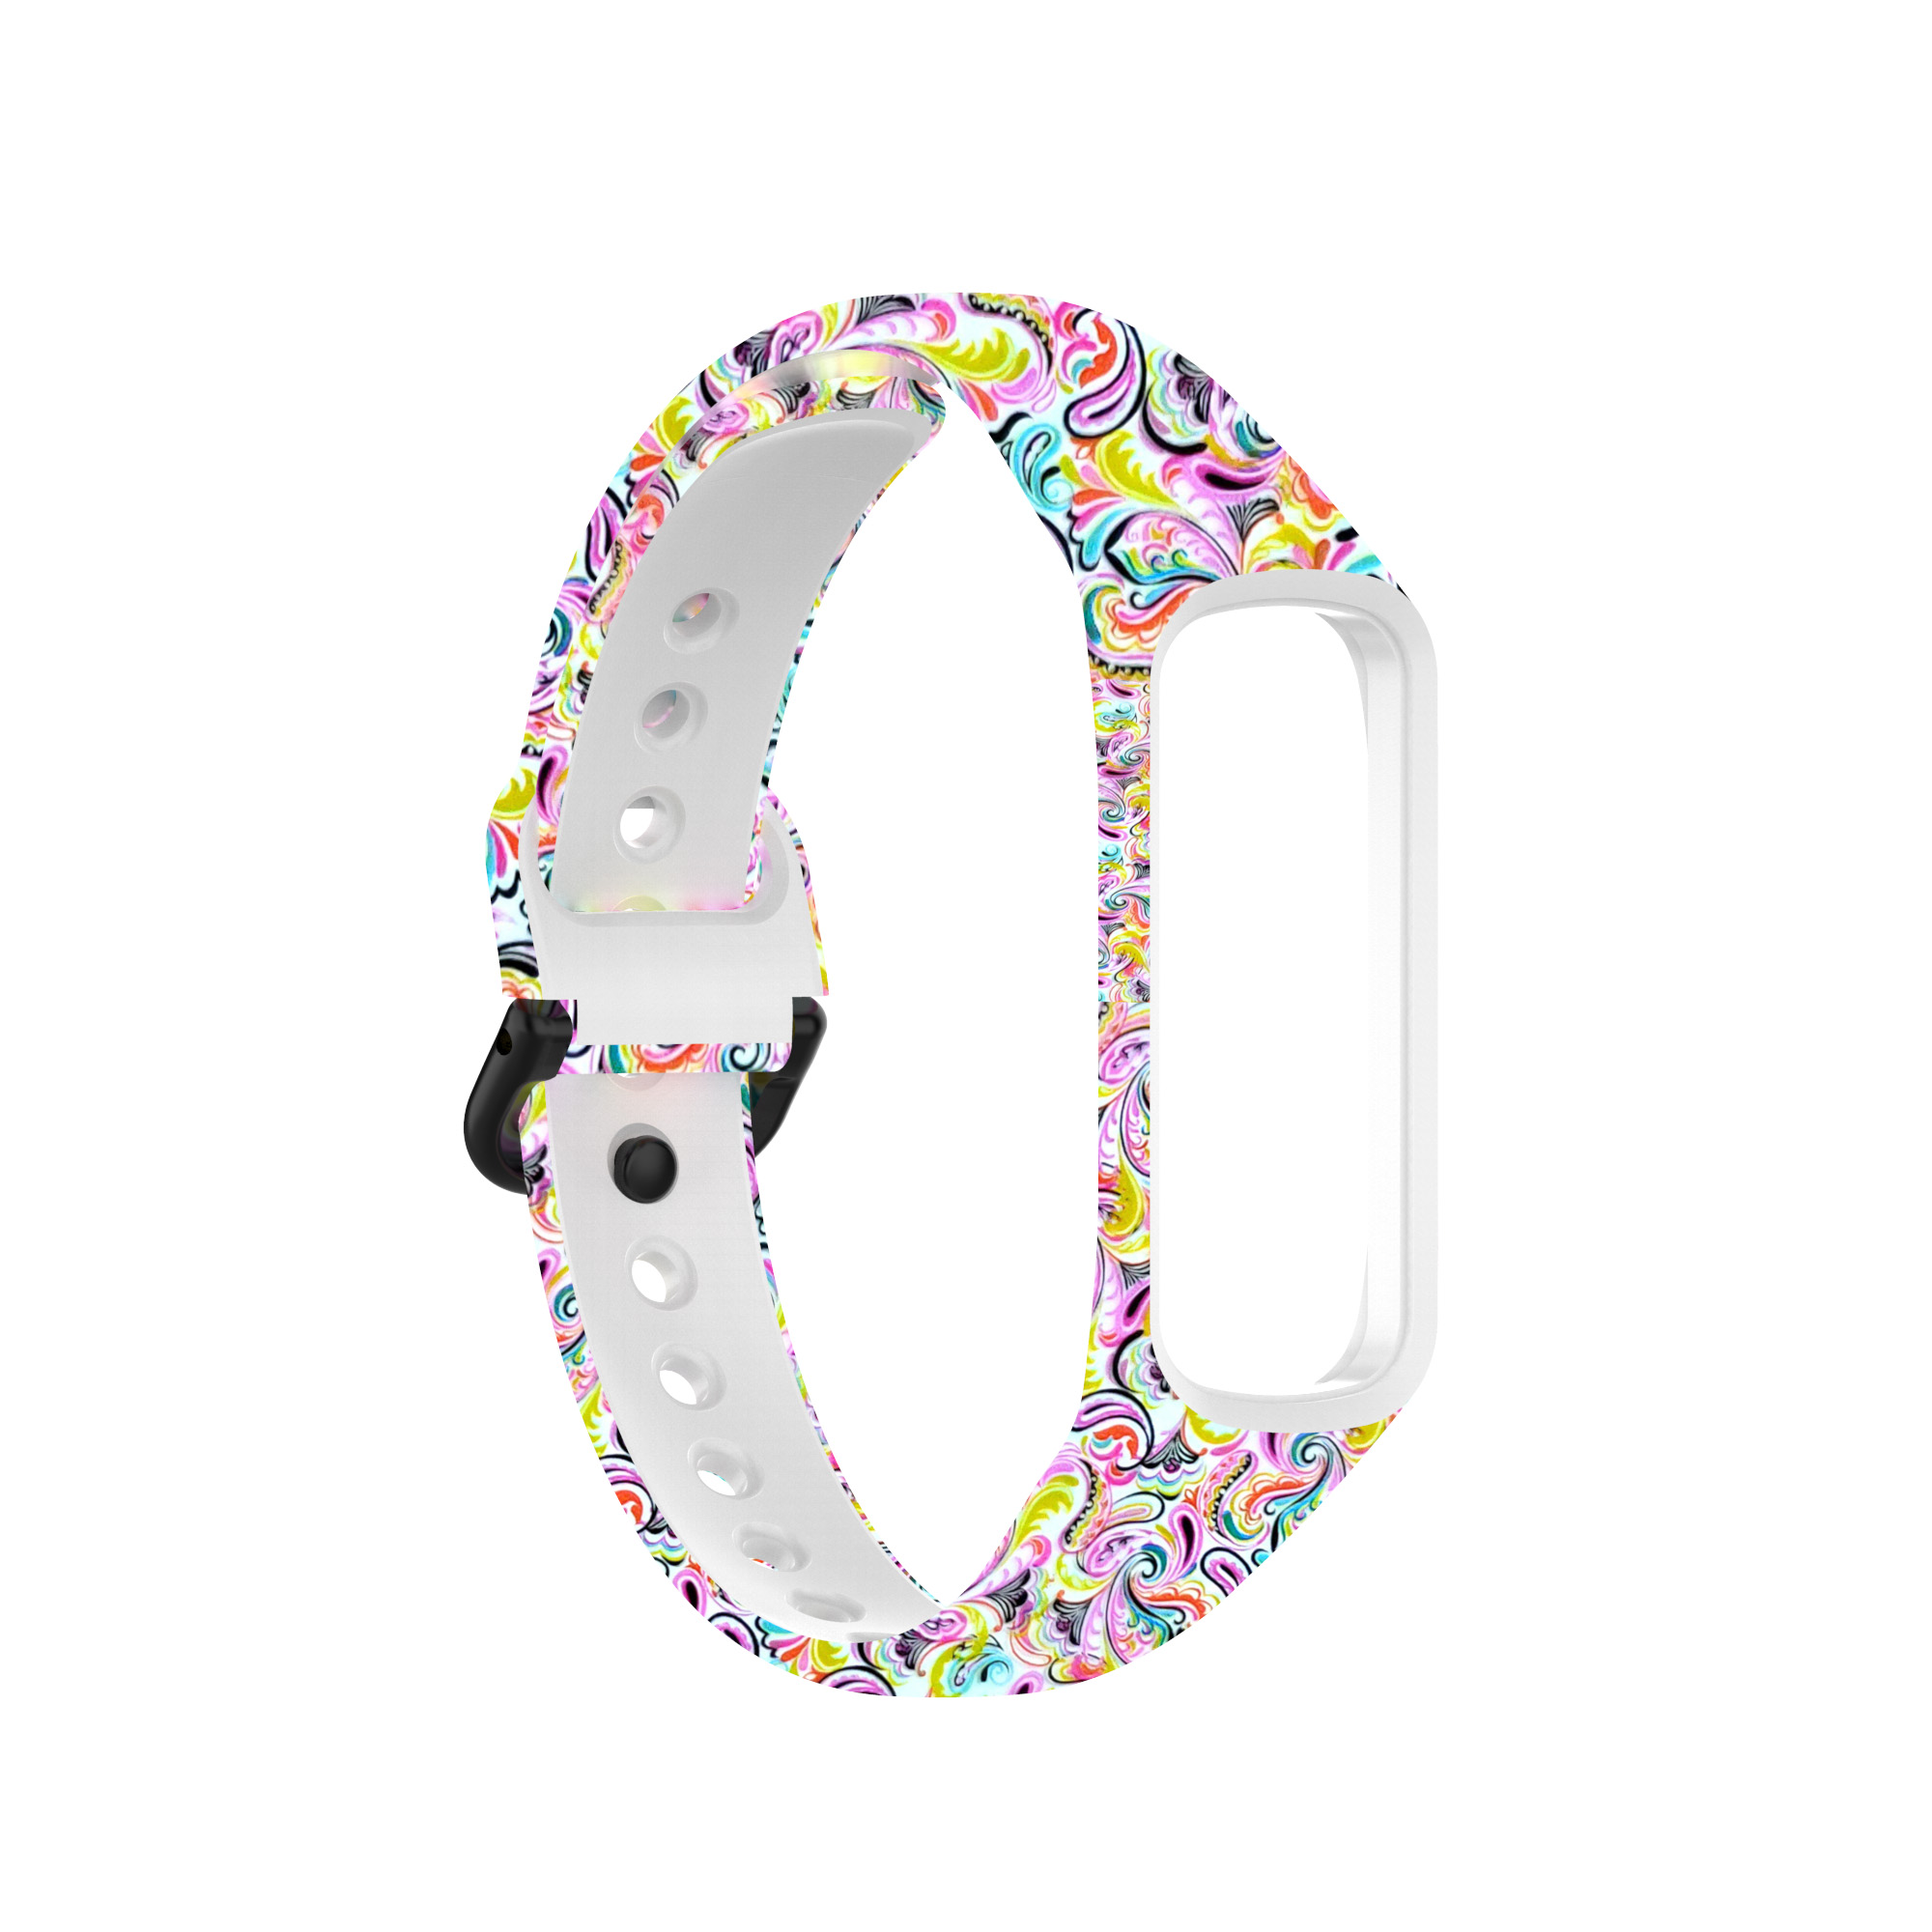 Bakeey-Printed-Pattern-Stainless-Steel-Buckle-Smart-watch-Band-Replacement-Strap-For-Samsung-Galaxy--1806217-13